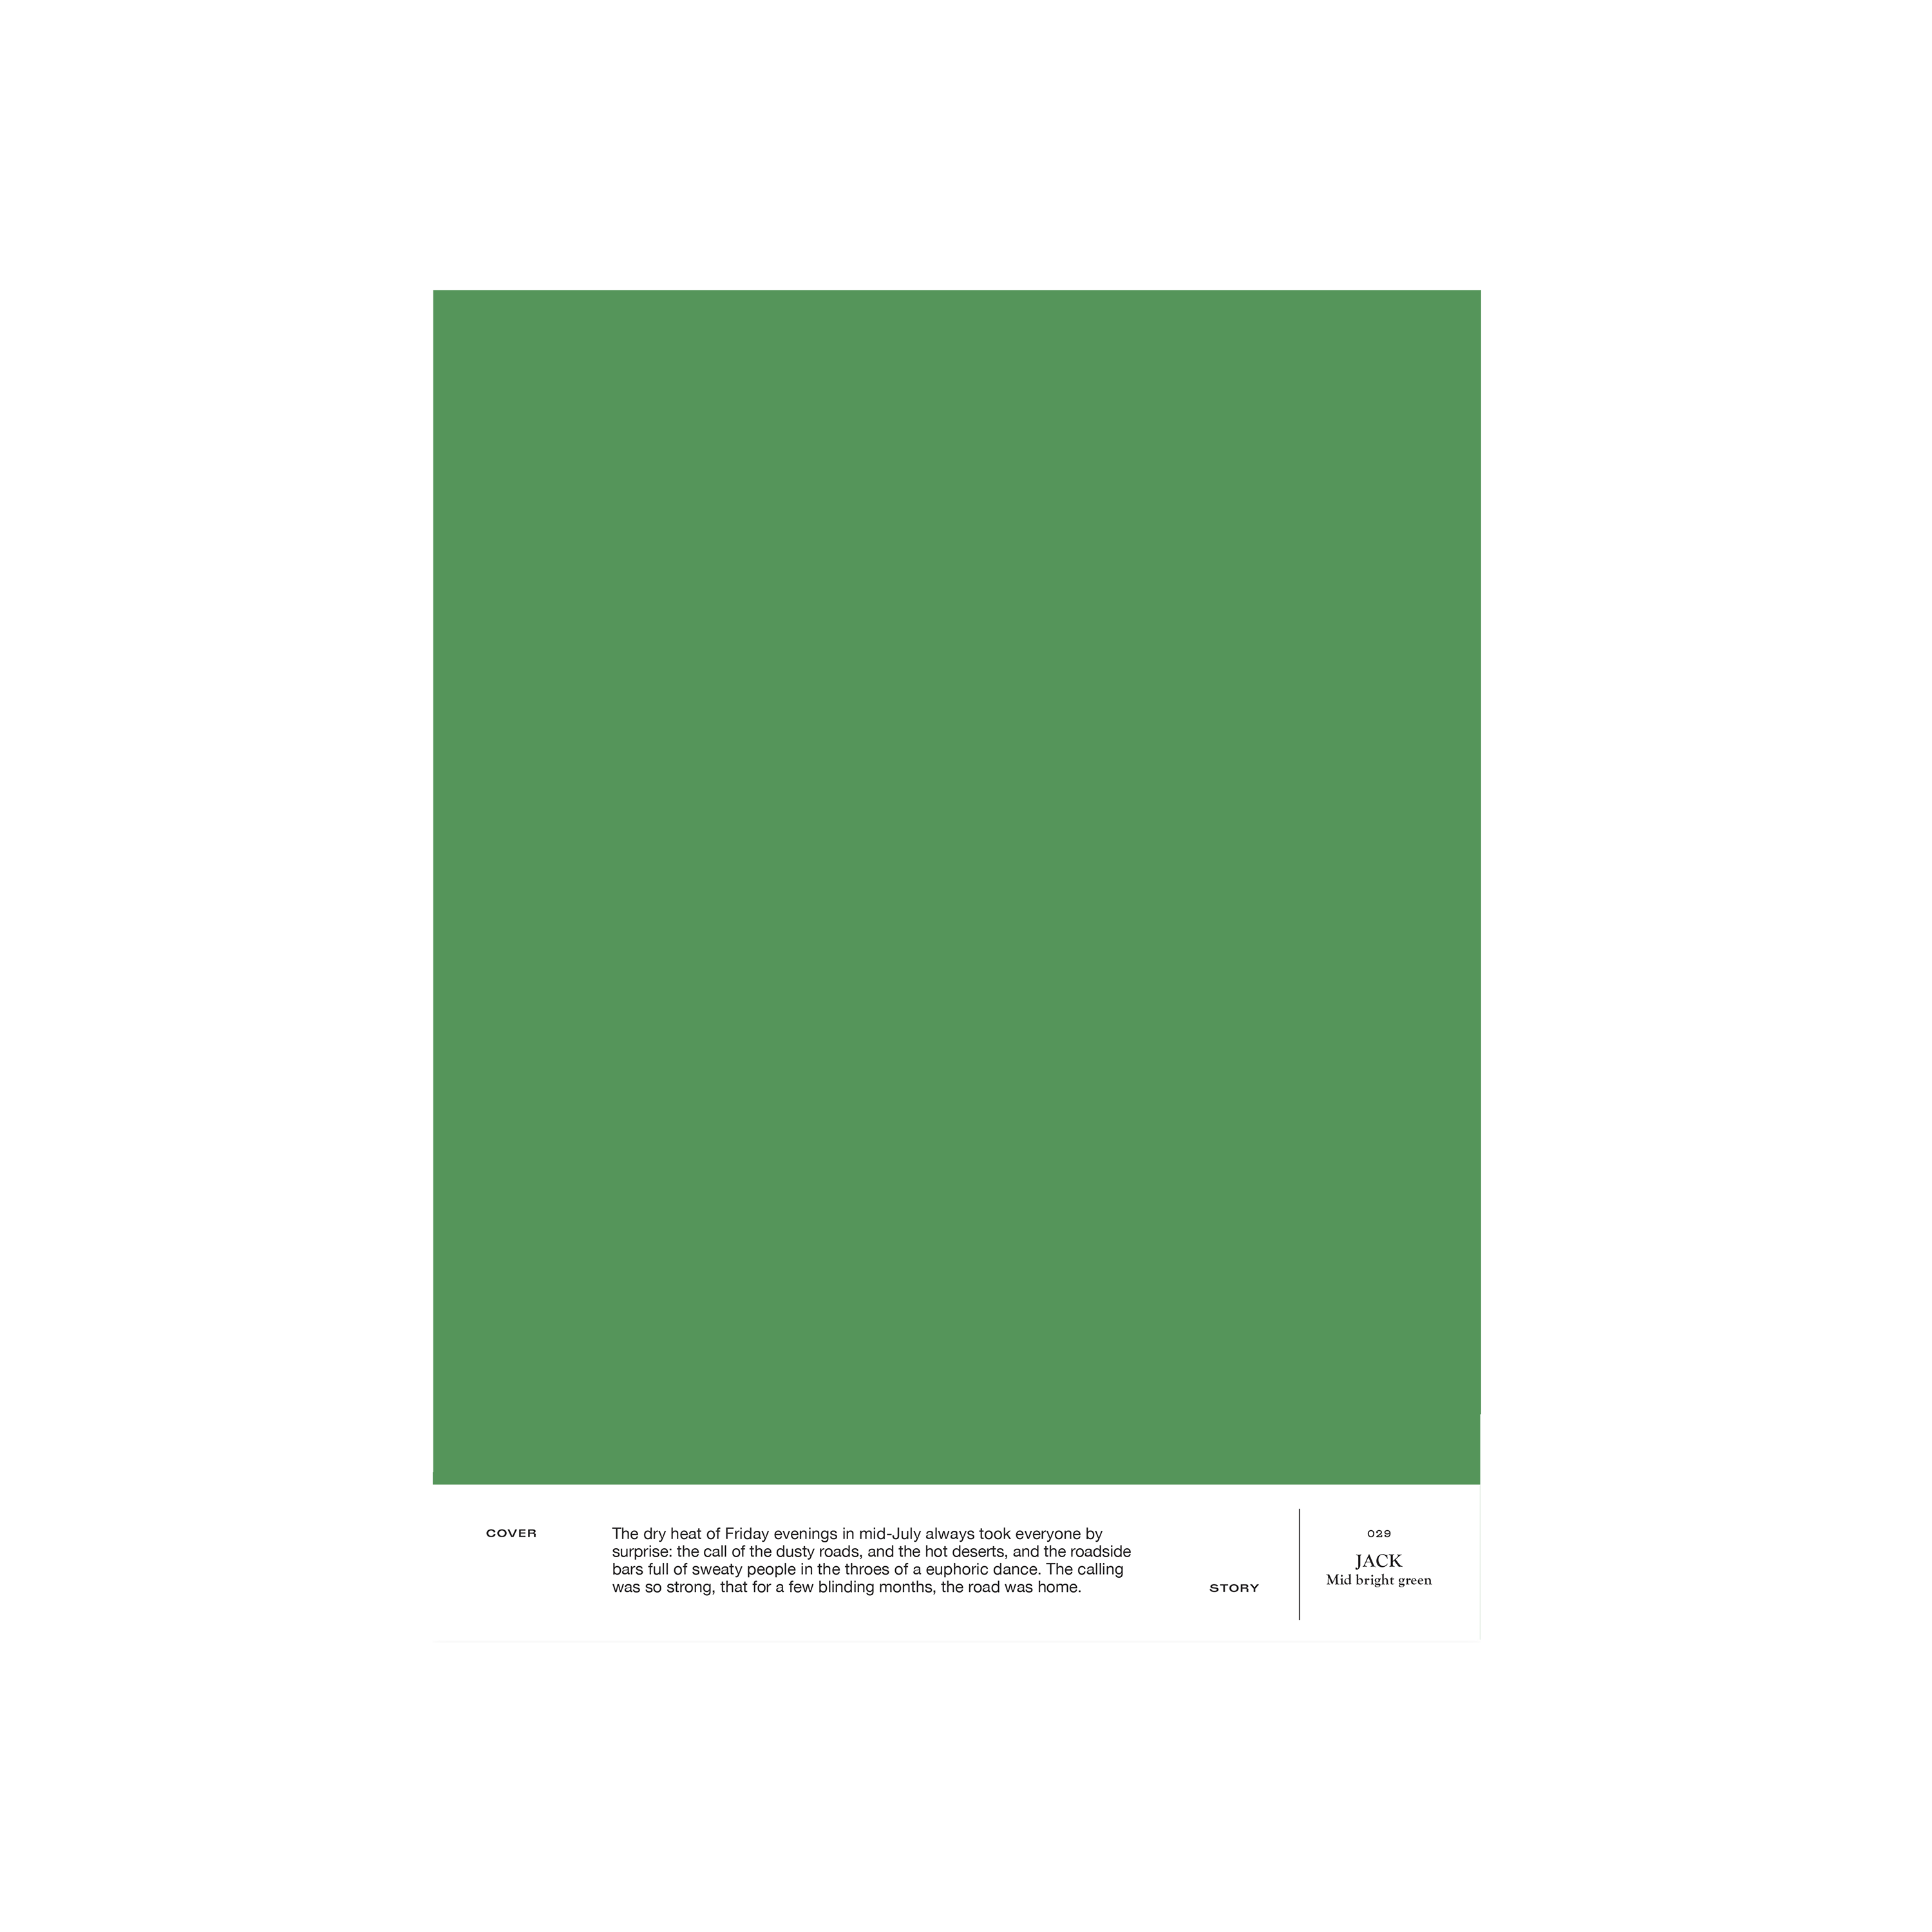 Mid bright green interior paint Cover Story 029 JACK